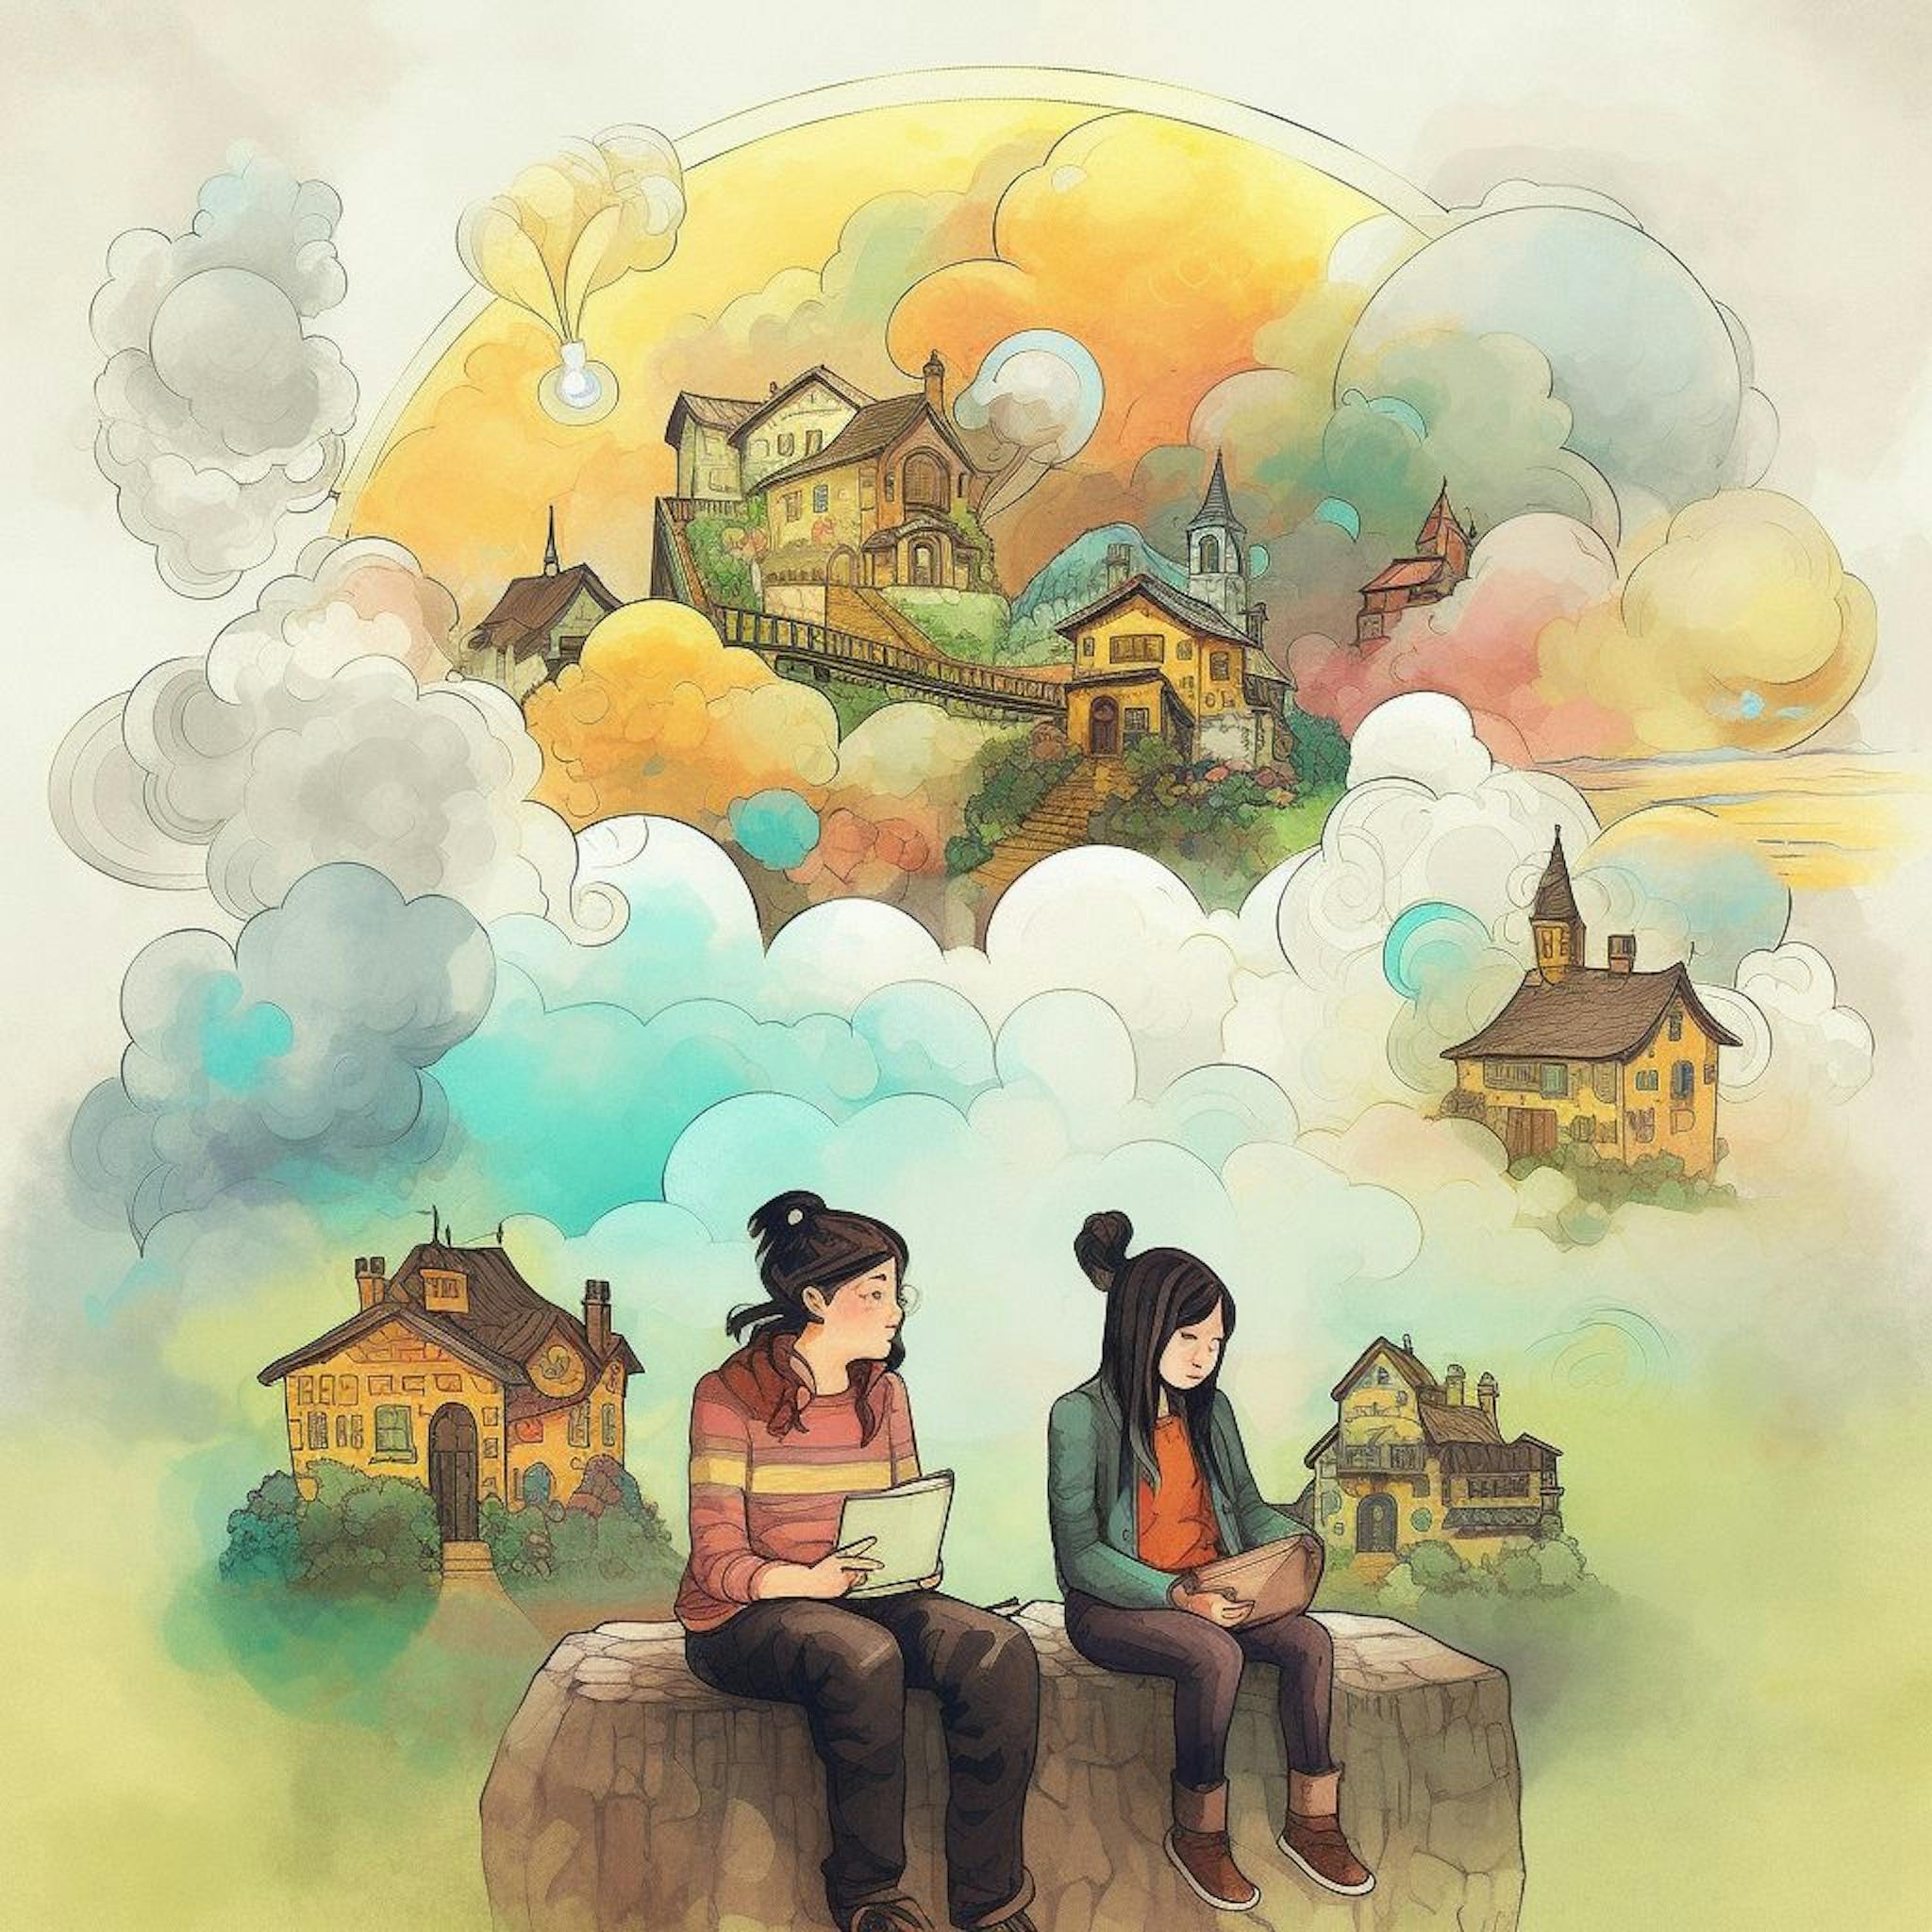 Midjourney v5: “painterly illustration of four people with thought bubbles filled with imaginative fantasy locations”